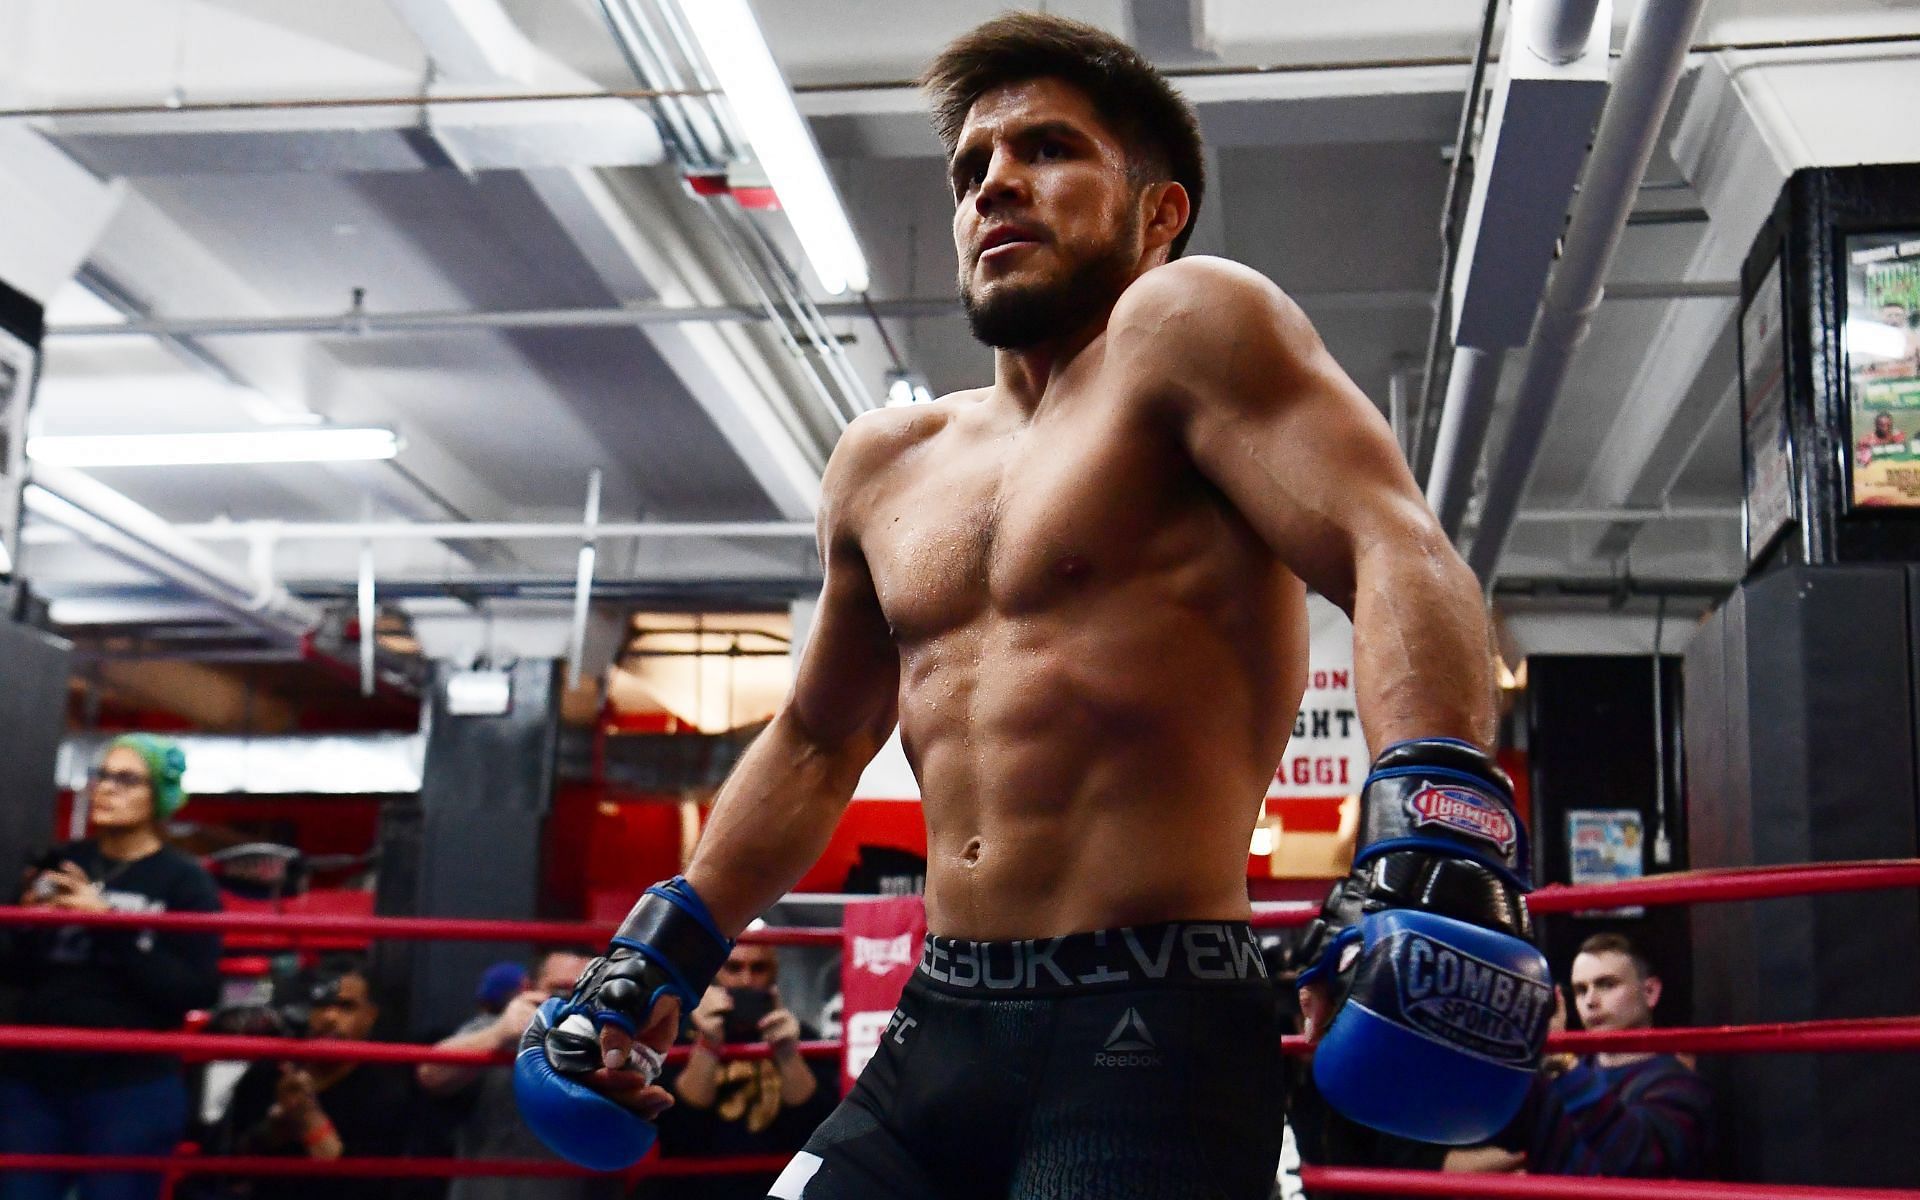 Former two-division UFC champion Henry Cejudo is eyeing a triumphant return to MMA competition in 2023